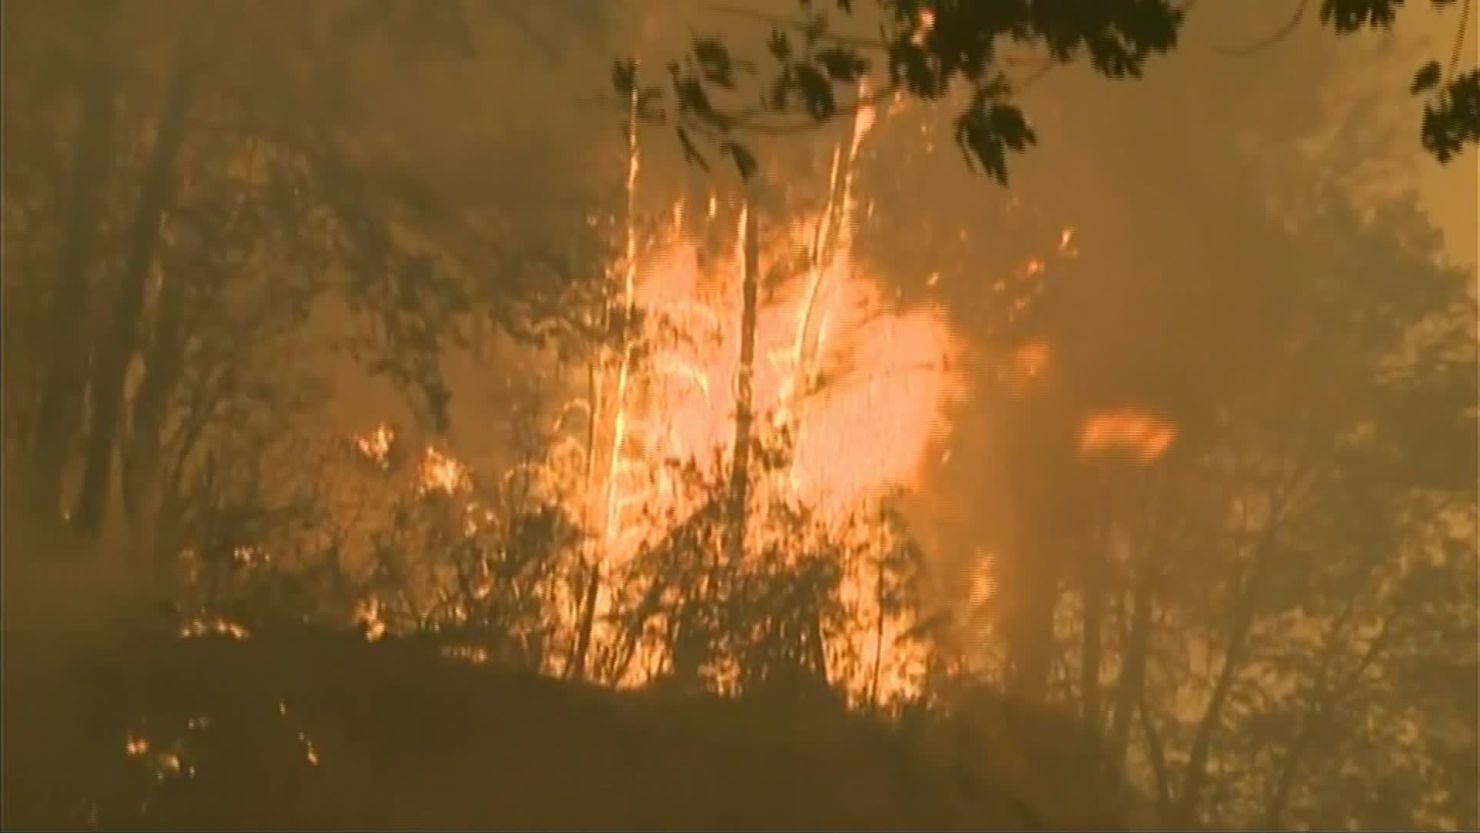 The Butte Fire has burned down dozens of homes and outbuildings